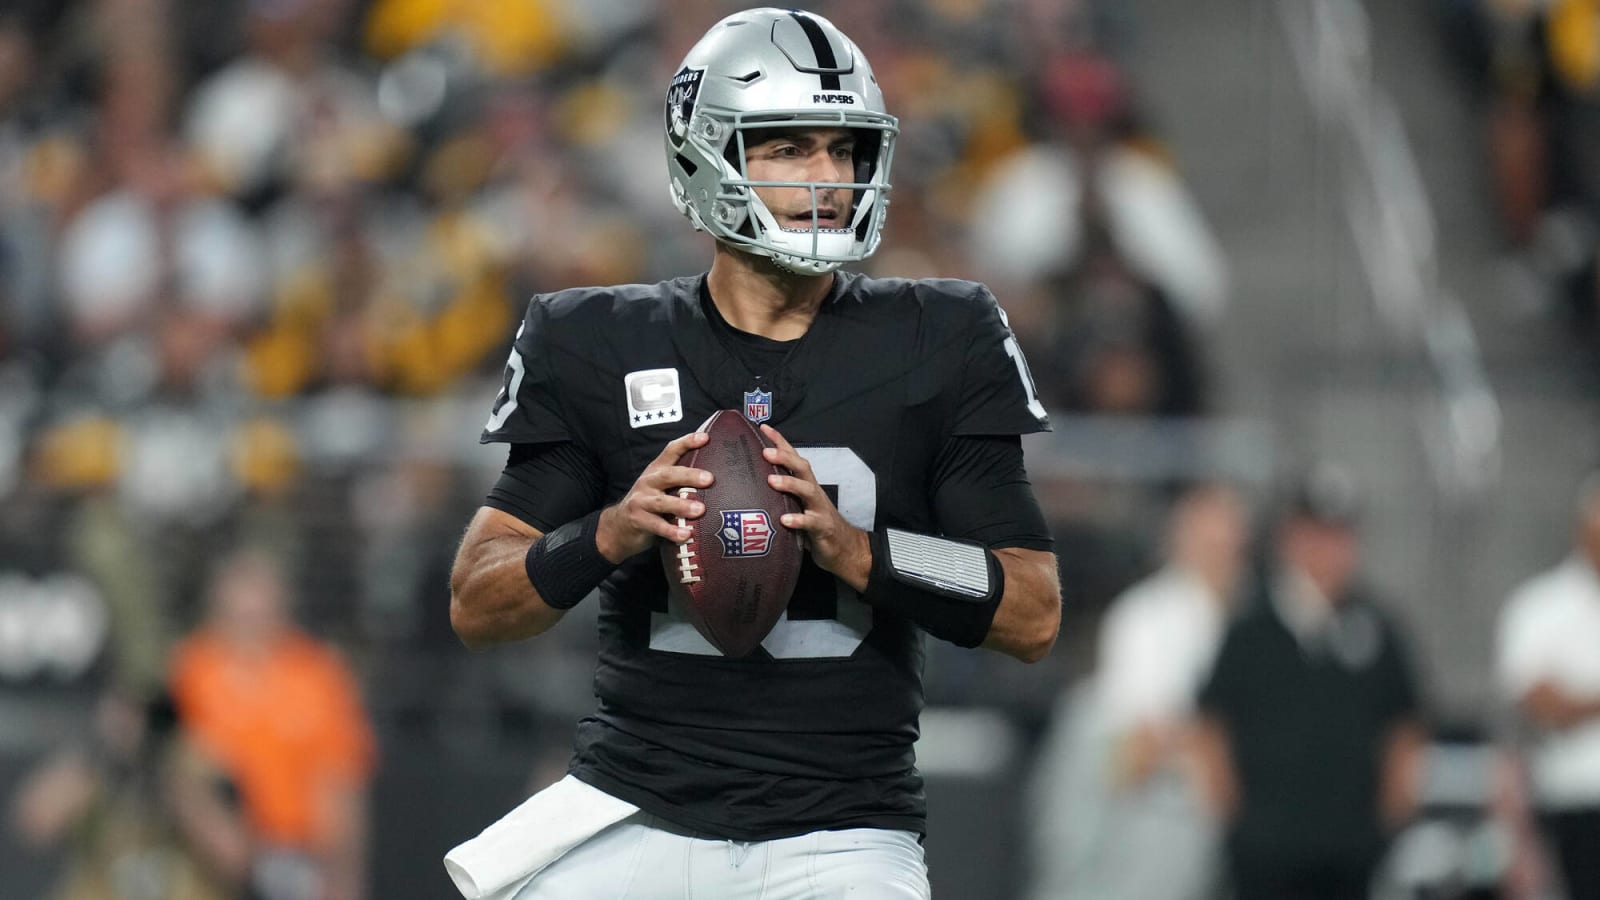 Knee-Jerk Reactions To Raiders’ Week 3 Loss: Garoppolo And Peters Are Washed